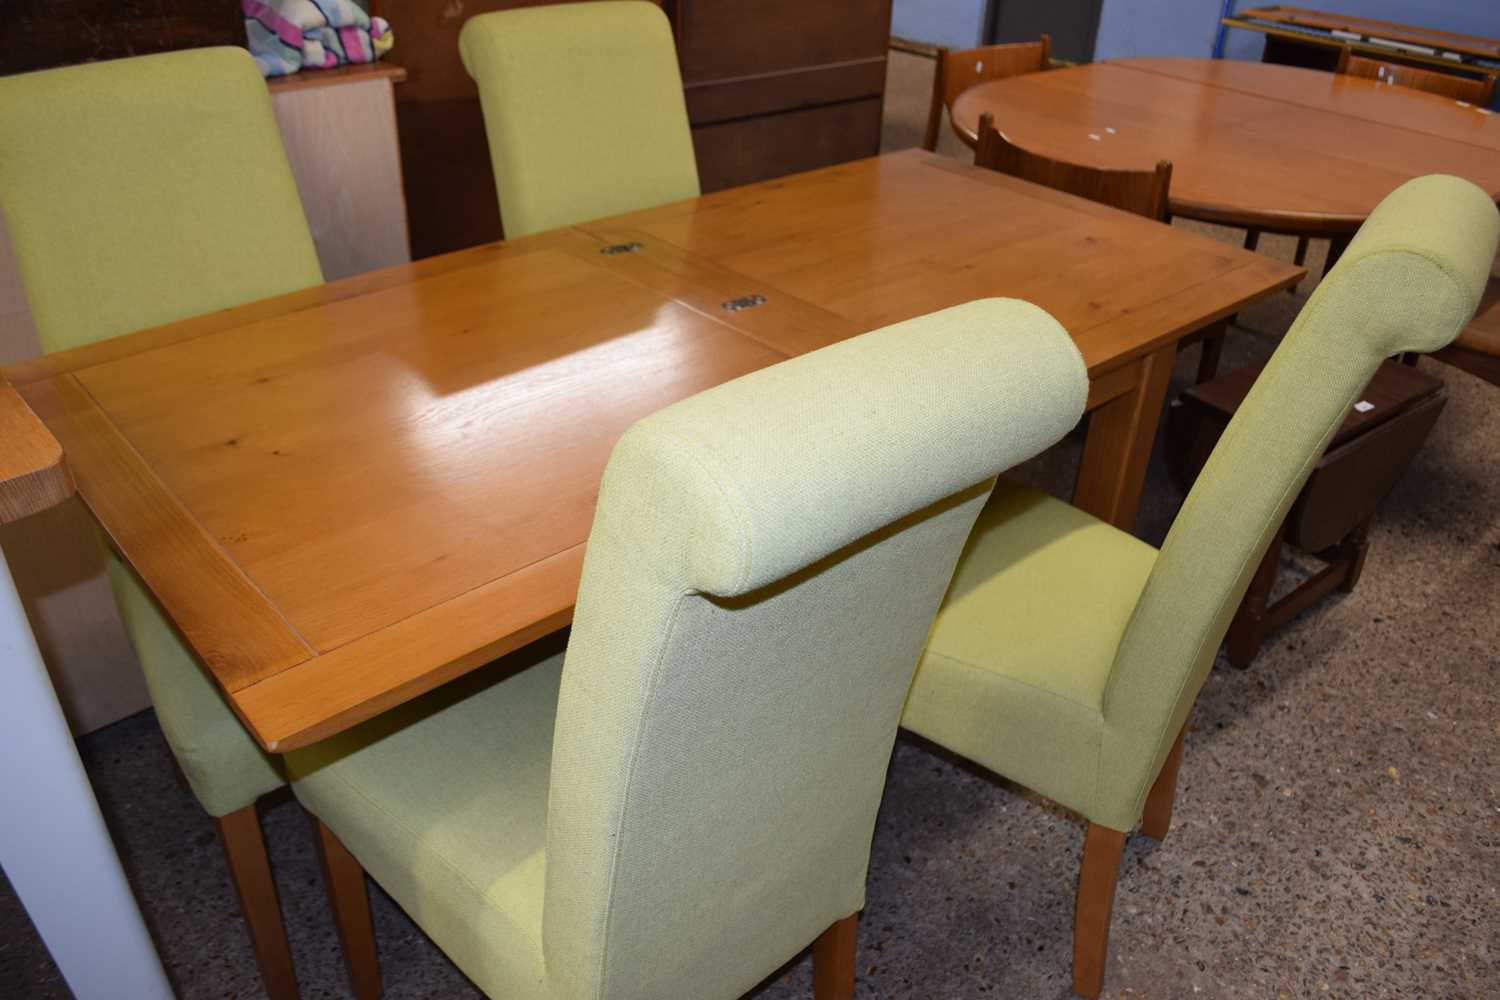 MODERN OAK DINING TABLE TOGETHER WITH FOUR GREEN UPHOLSTERED DINING CHAIRS